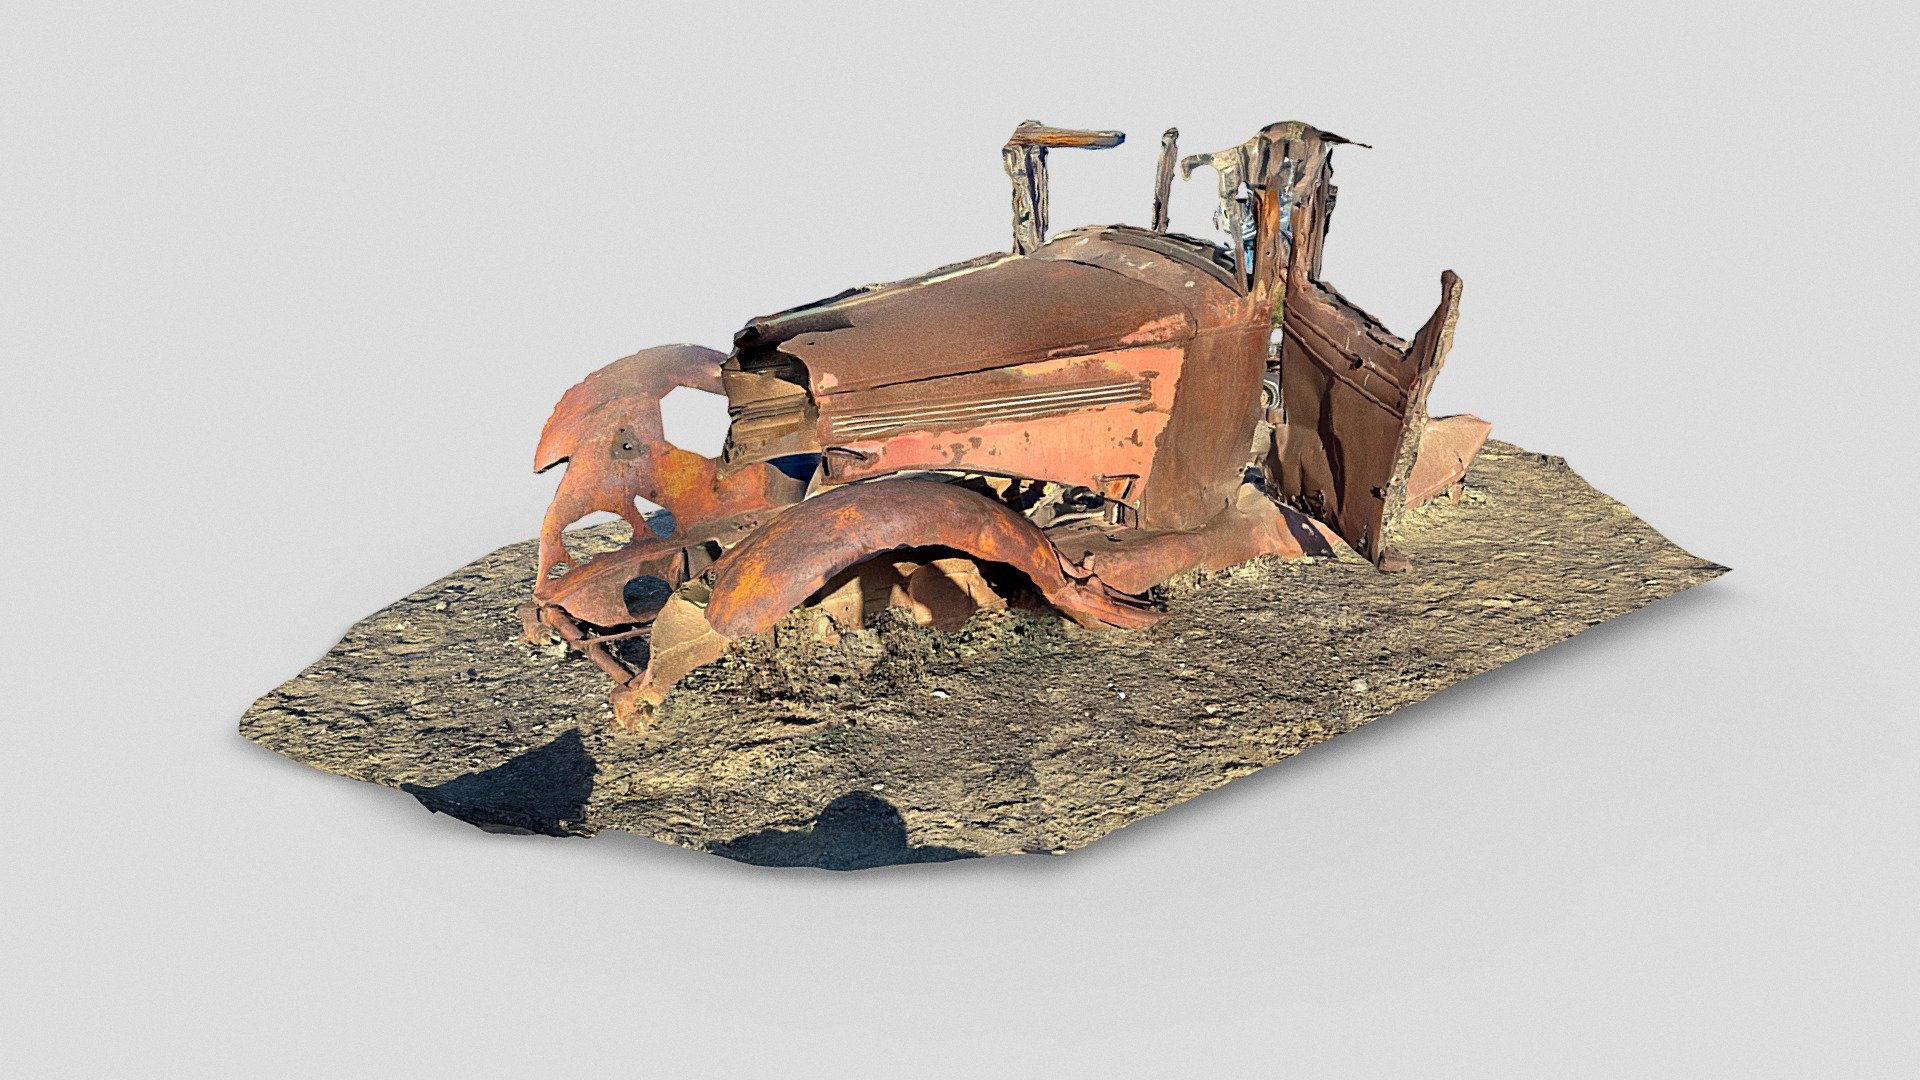 An old rusty car wreck at Ballarat Ghost Town - near Death Valley. 

Scanned with Scenario and the iPhone (https://apps.apple.com/us/app/scenario-play-with-reality/id1590029370) -  Capture 3D models, build 3D scenes and connect with other creators, all from your phone.

Please feel free to follow my collections of daily scans (link) as well as my scans in San Francisco, Paris, or in the catacombs (link). Follow me on Twitter - Day 332: Rusty car wreck (Ballarat, CA) - Download Free 3D model by Emm (@edemaistre) 3d model